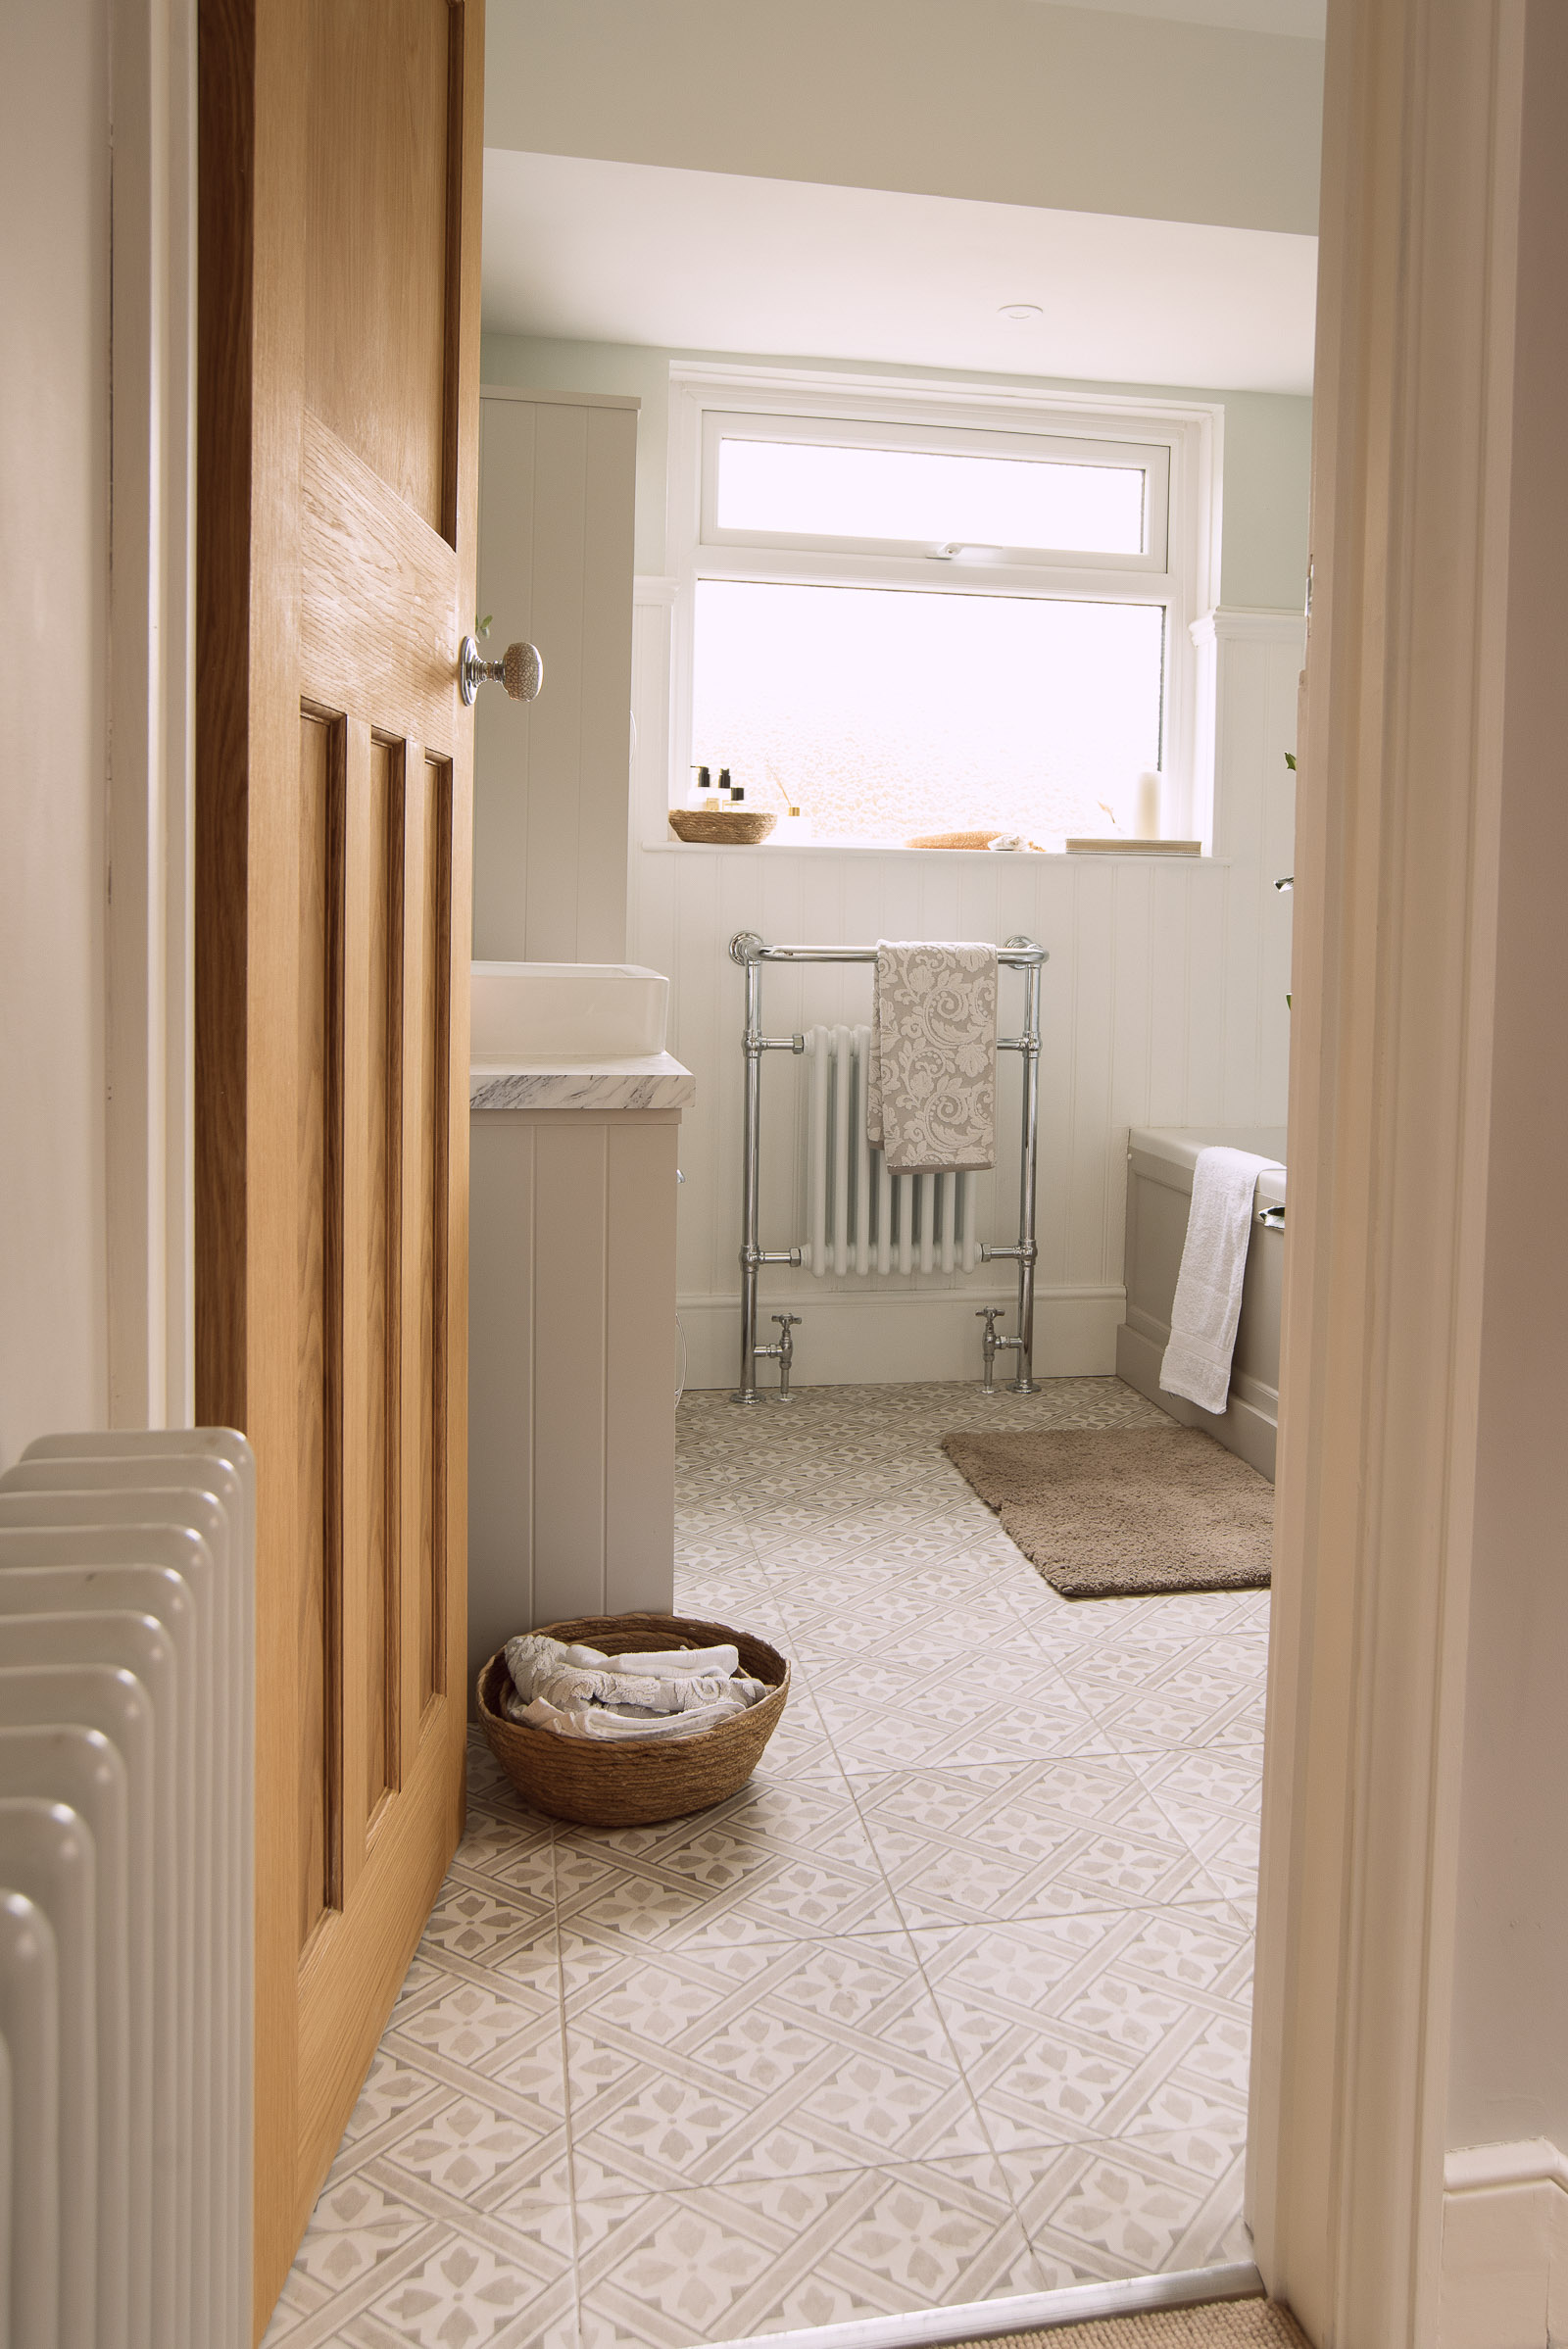 1930s bathroom ideas after renovation - Laura Ashley tiles in Dove Grey, available HERE.